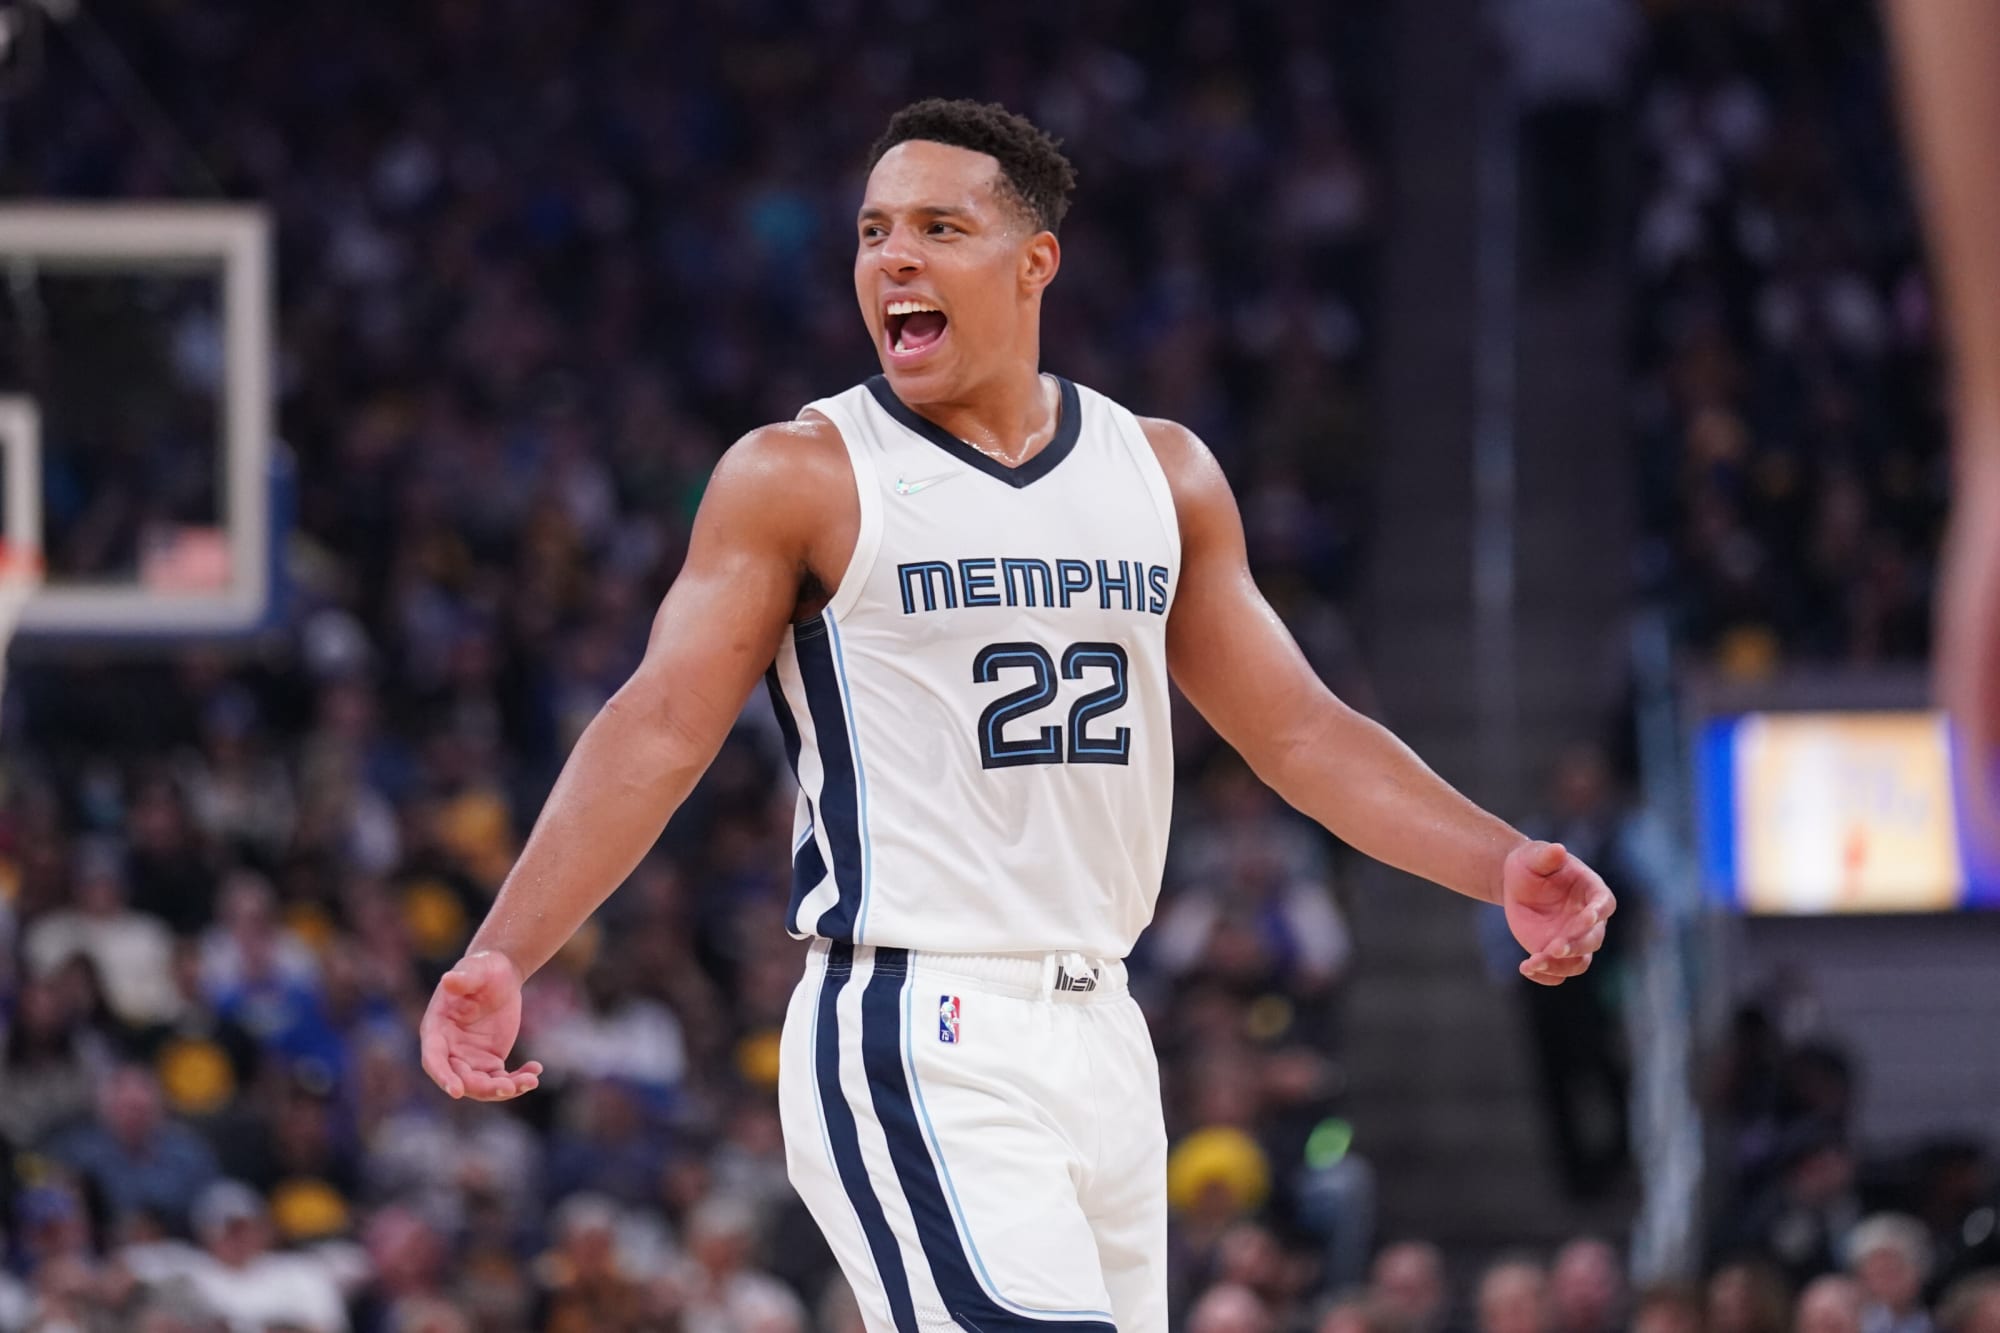 Memphis Grizzlies Spectacular season ends with Game 6 loss vs Golden State